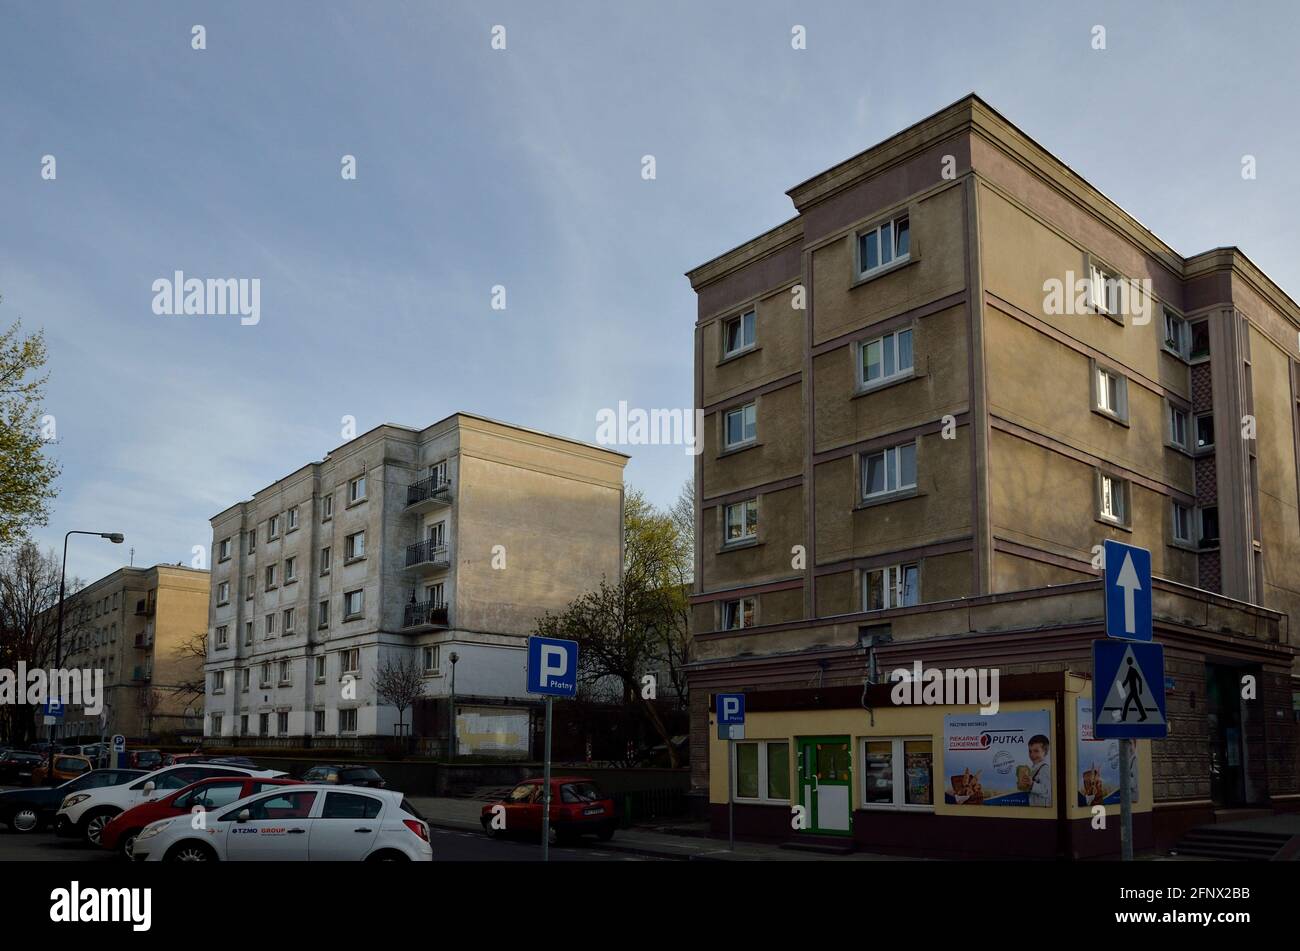 Residential buildings of Muranow neighbourhood, former Warsaw Ghetto area, Warsaw, Poland Stock Photo